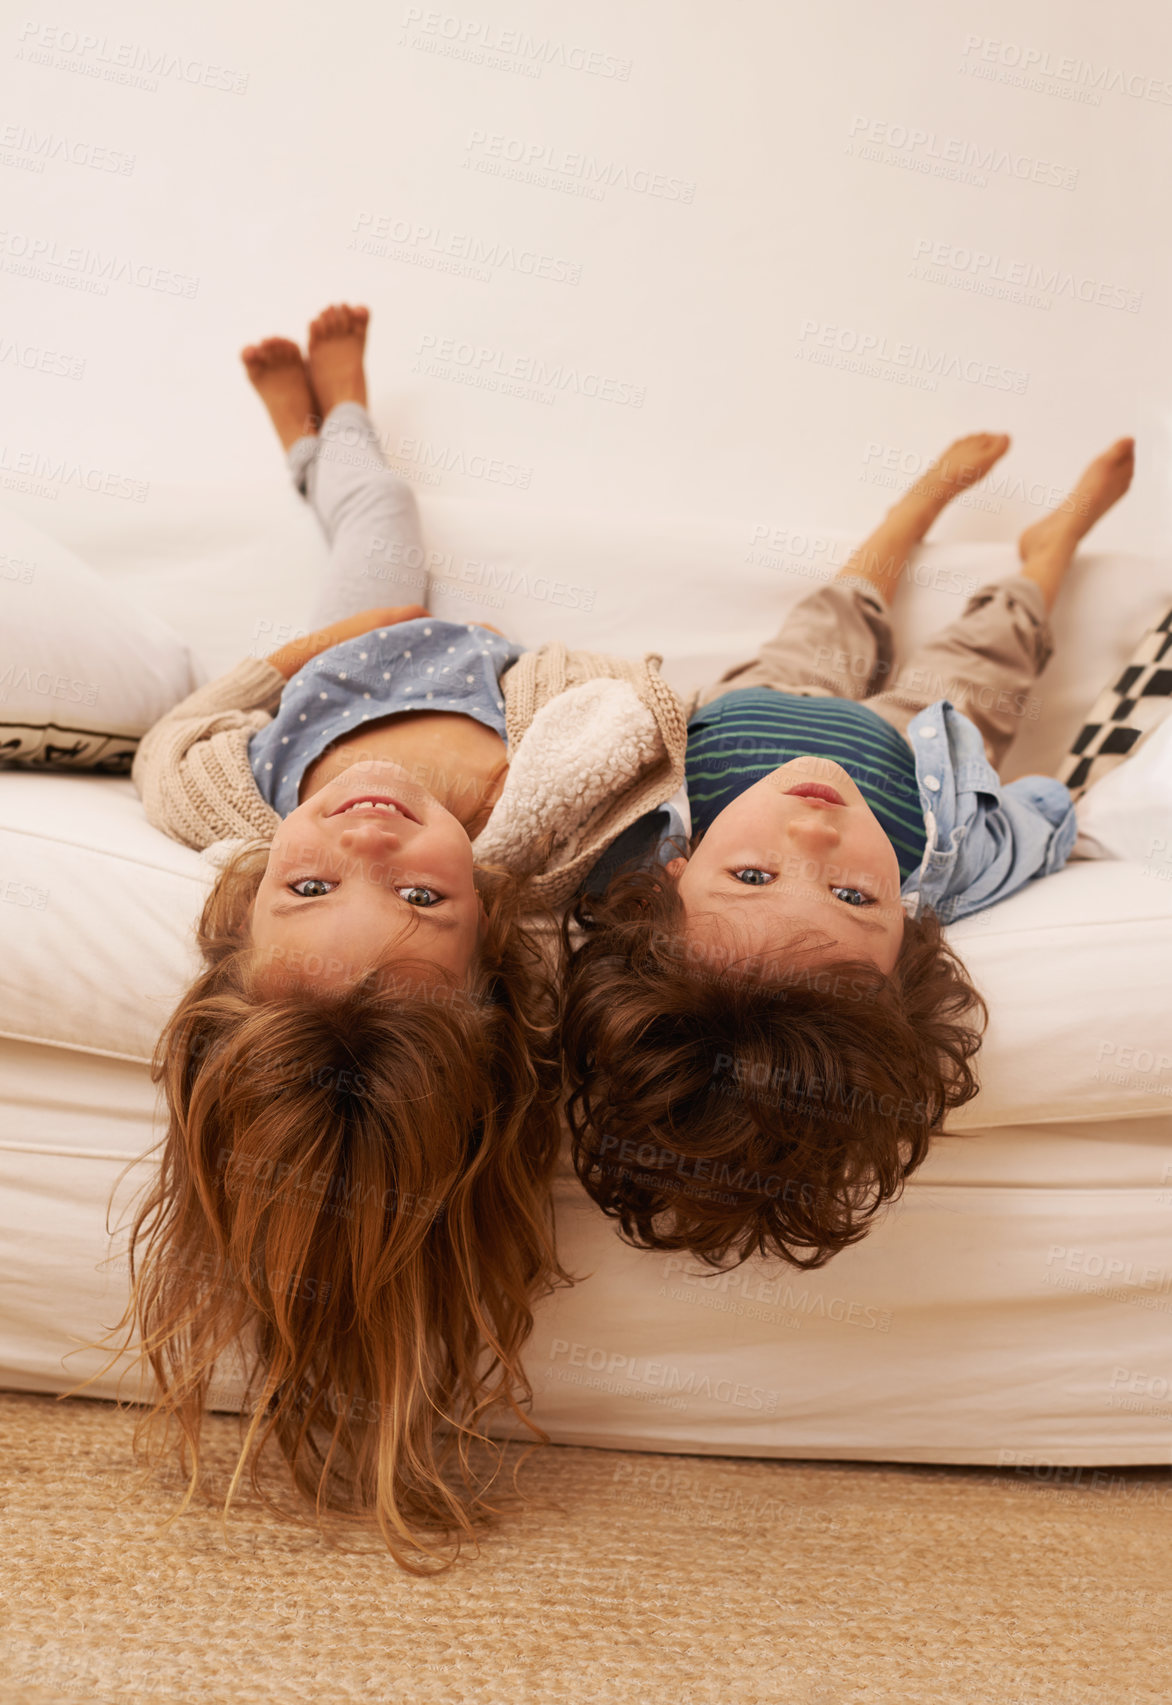 Buy stock photo Portrait of two young children lying on a sofa with their heads hanging over the edge